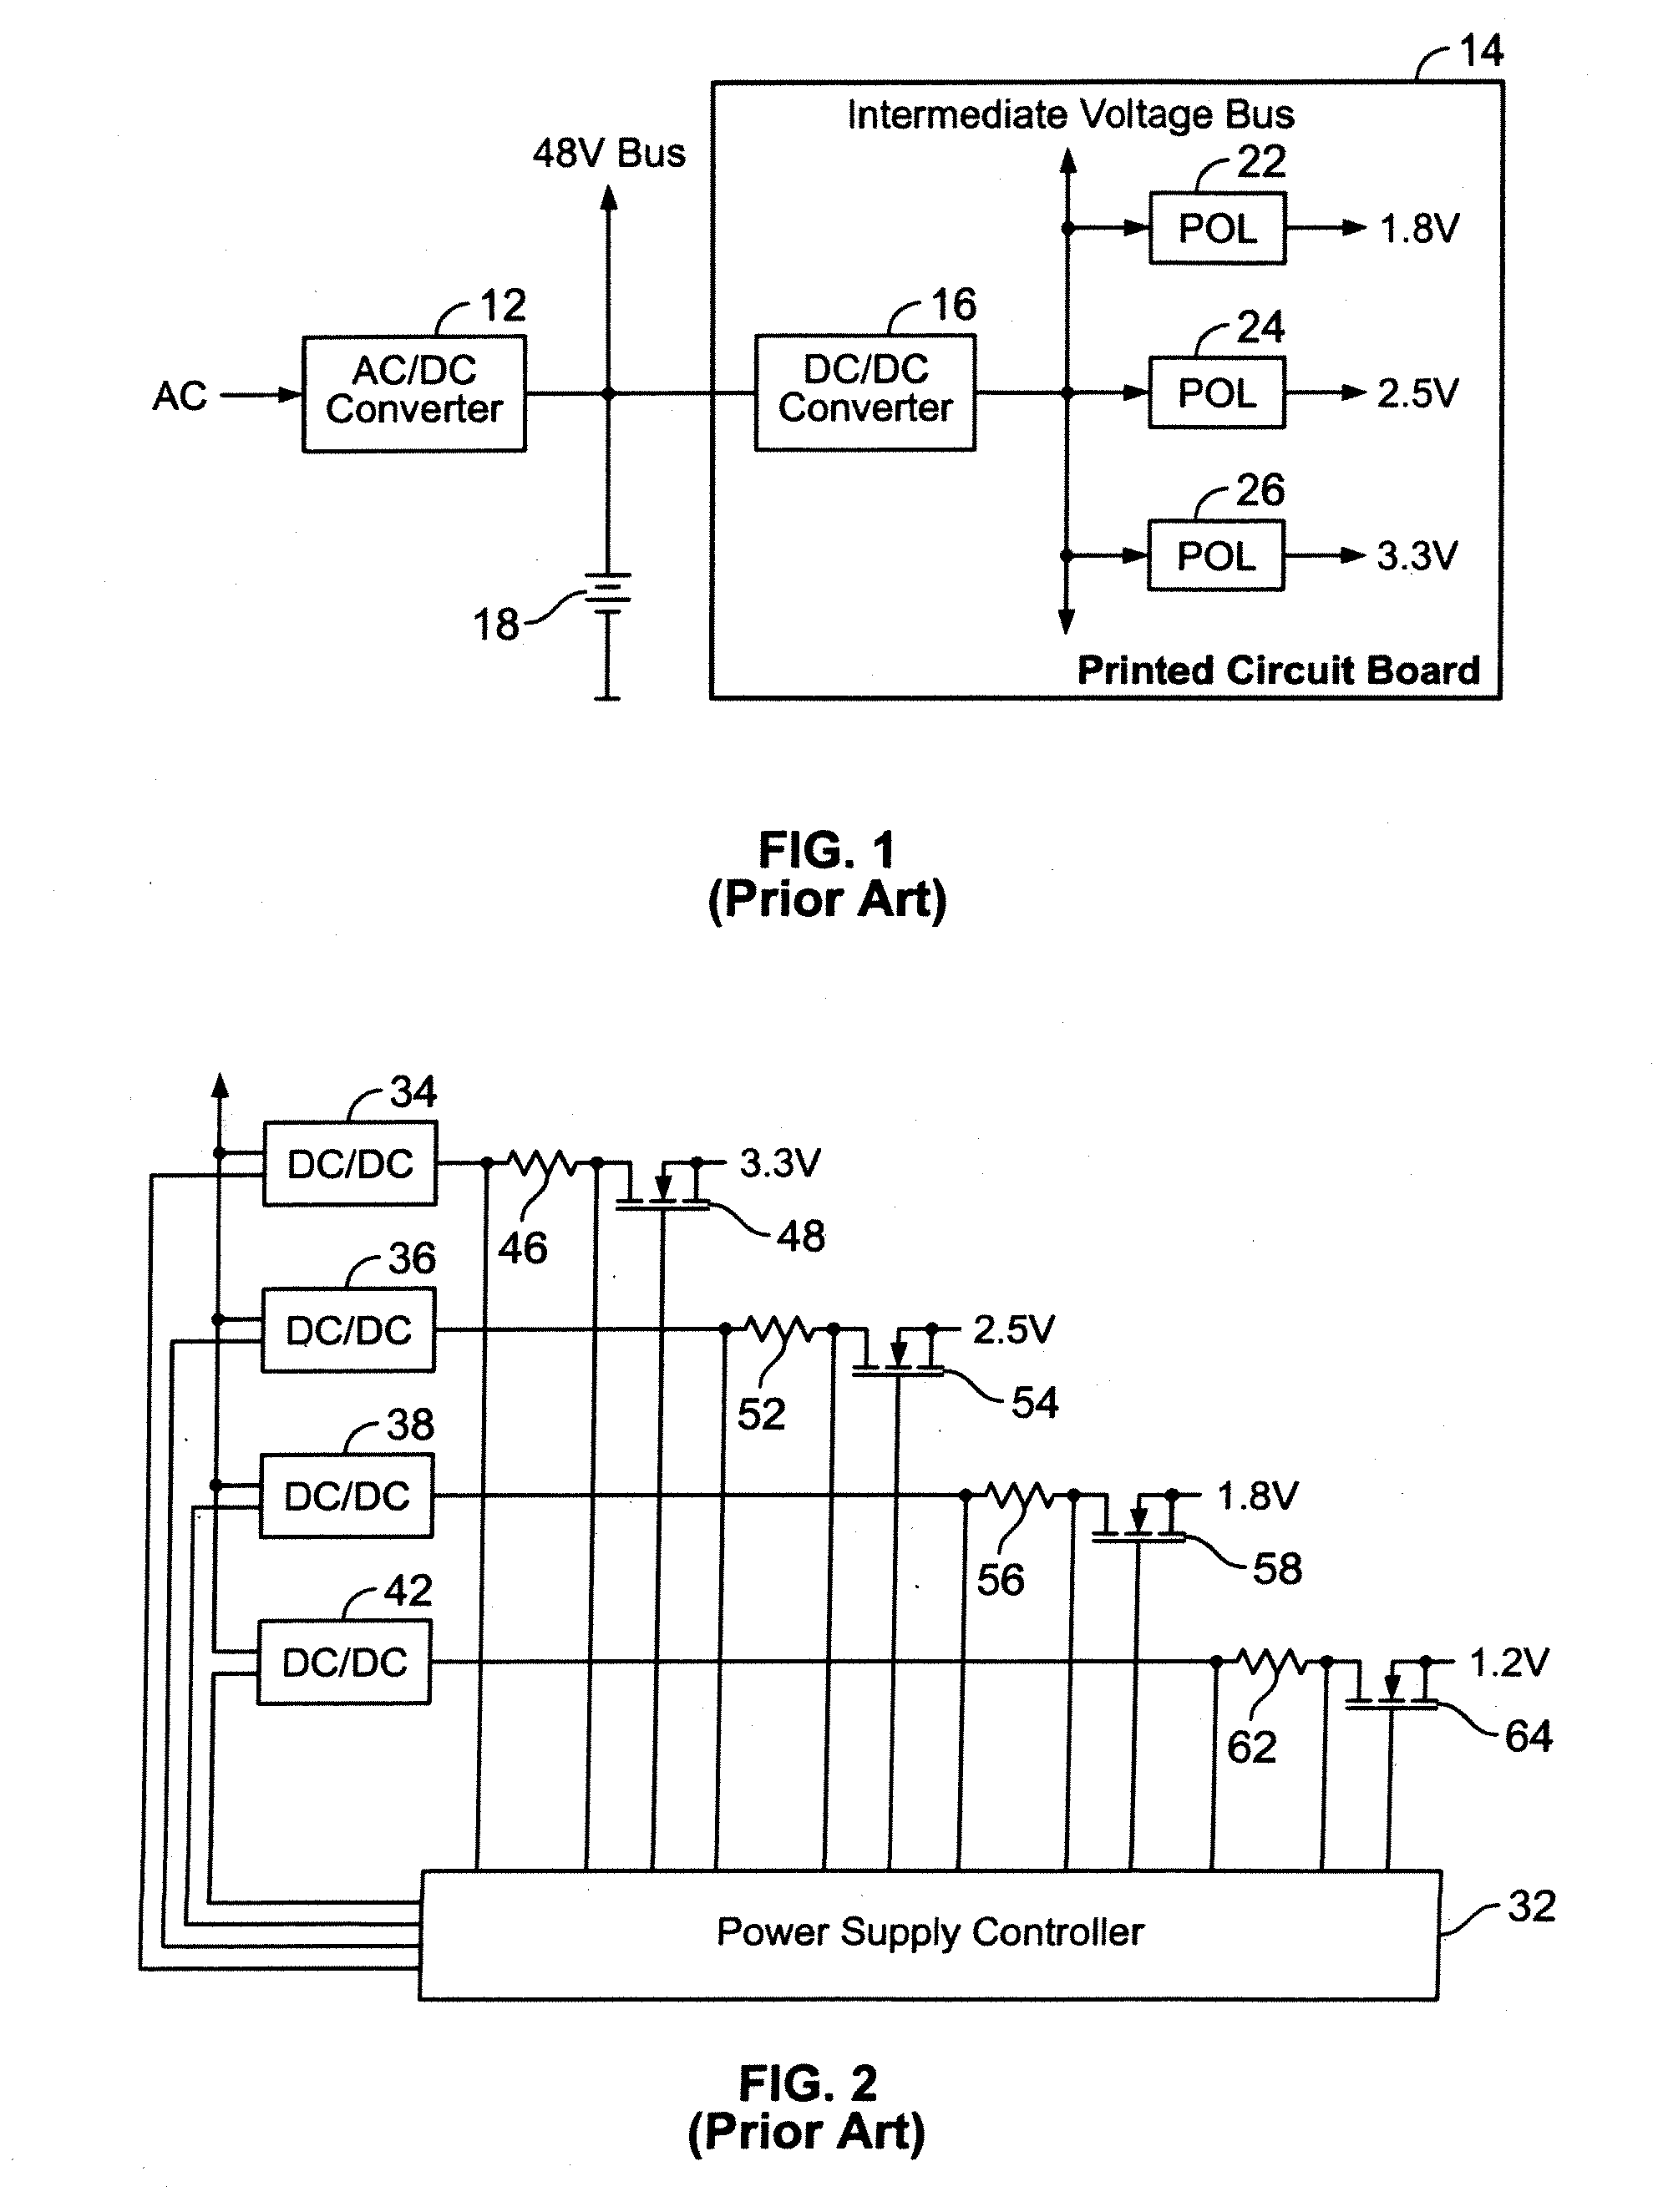 Method And System For Controlling And Monitoring An Array Of Point-Of-Load Regulators